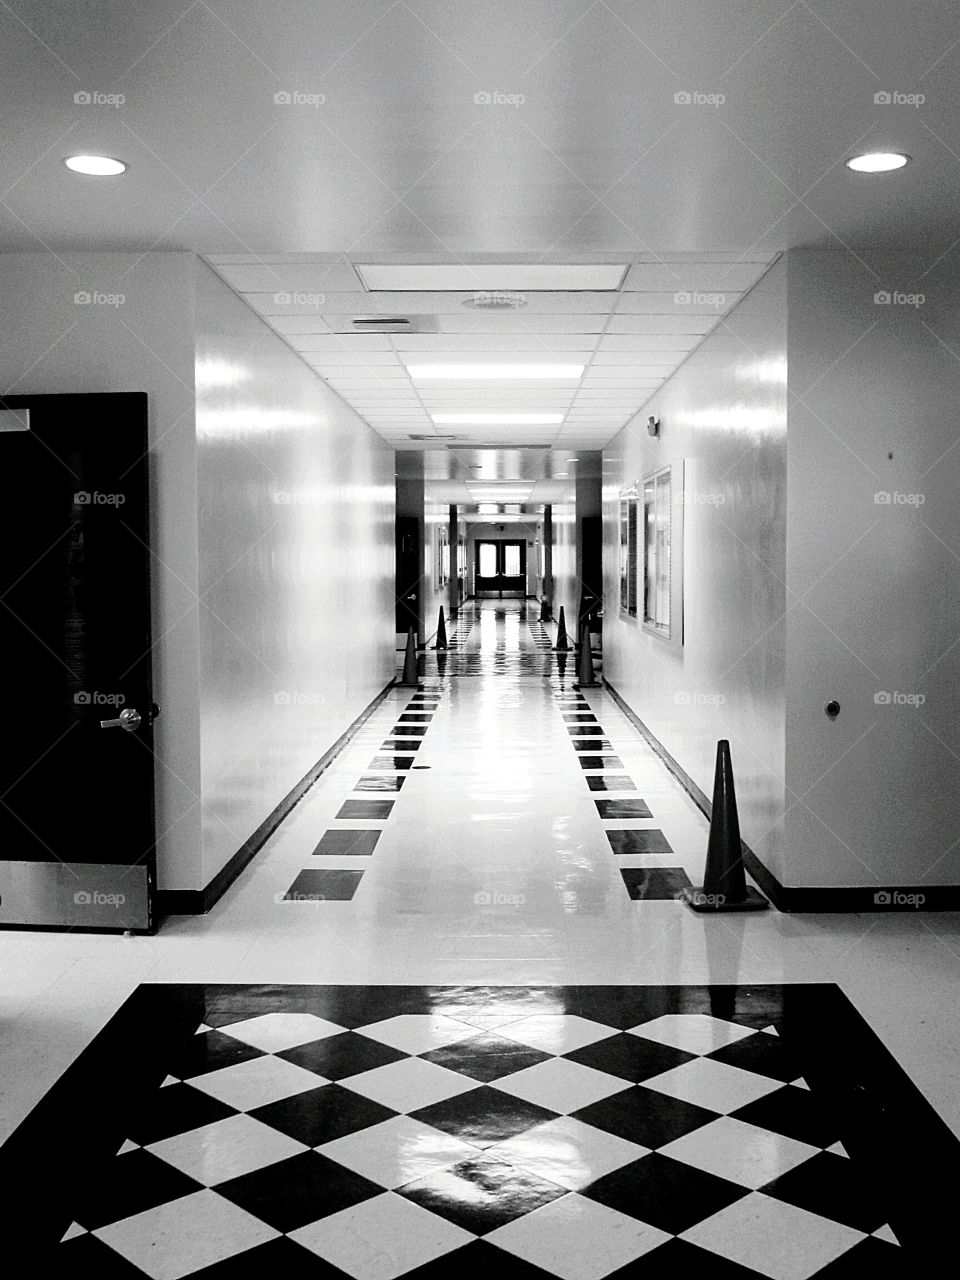 empty school hallway. Empty school hallway in black and white